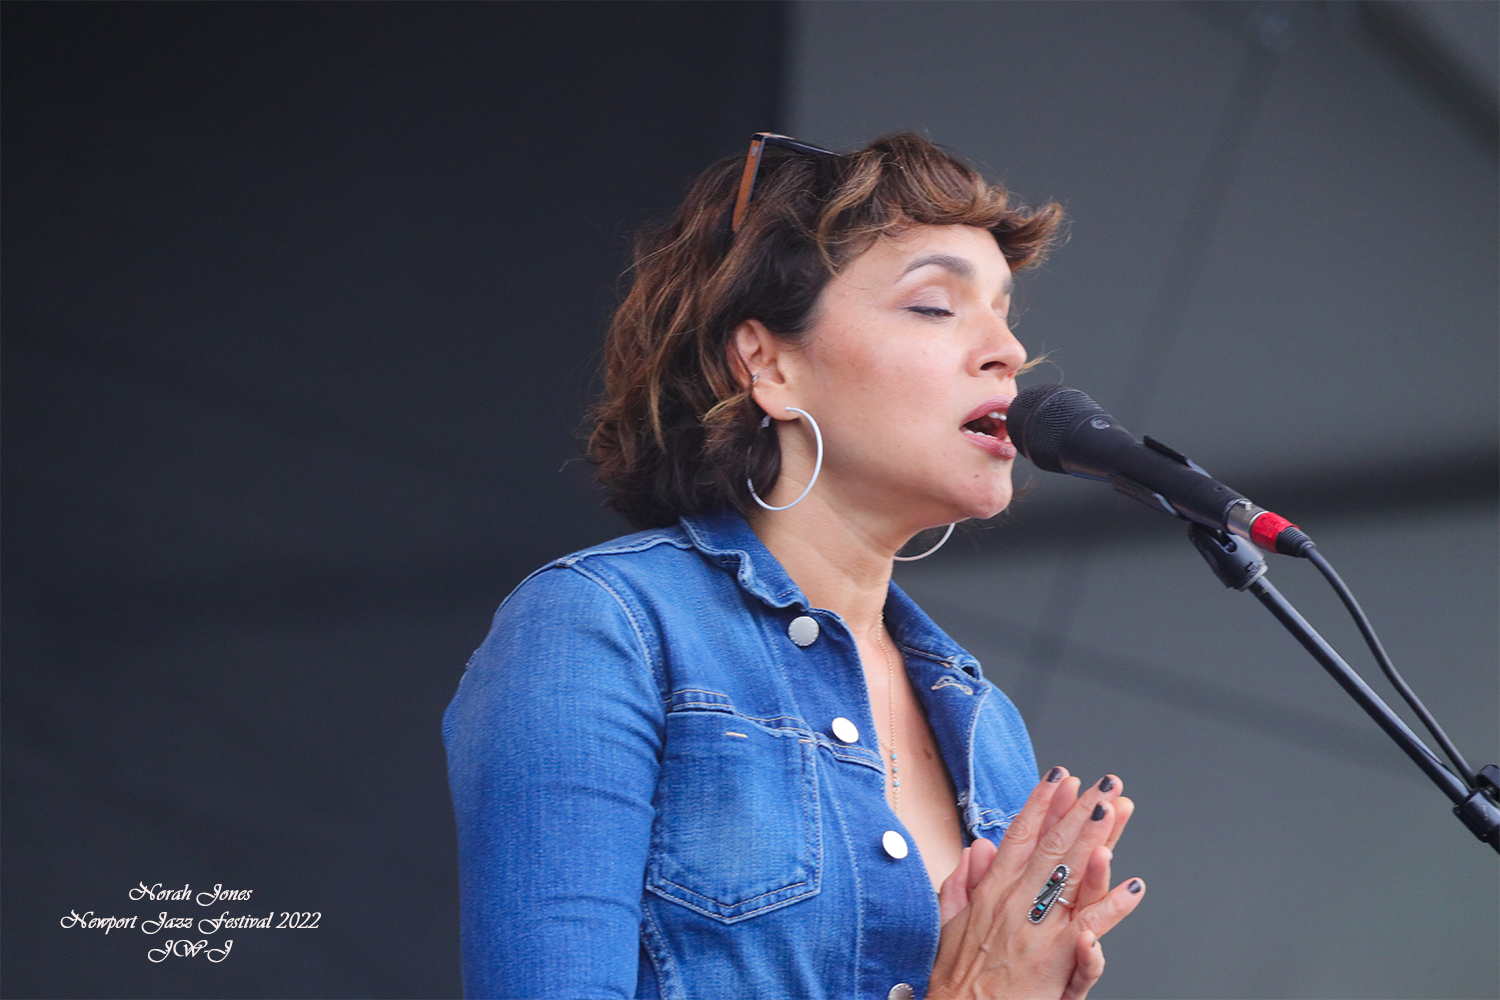 Full color shot of Norah Jones on stage at the 2022 Newport Jazz Festival in Rhode Island